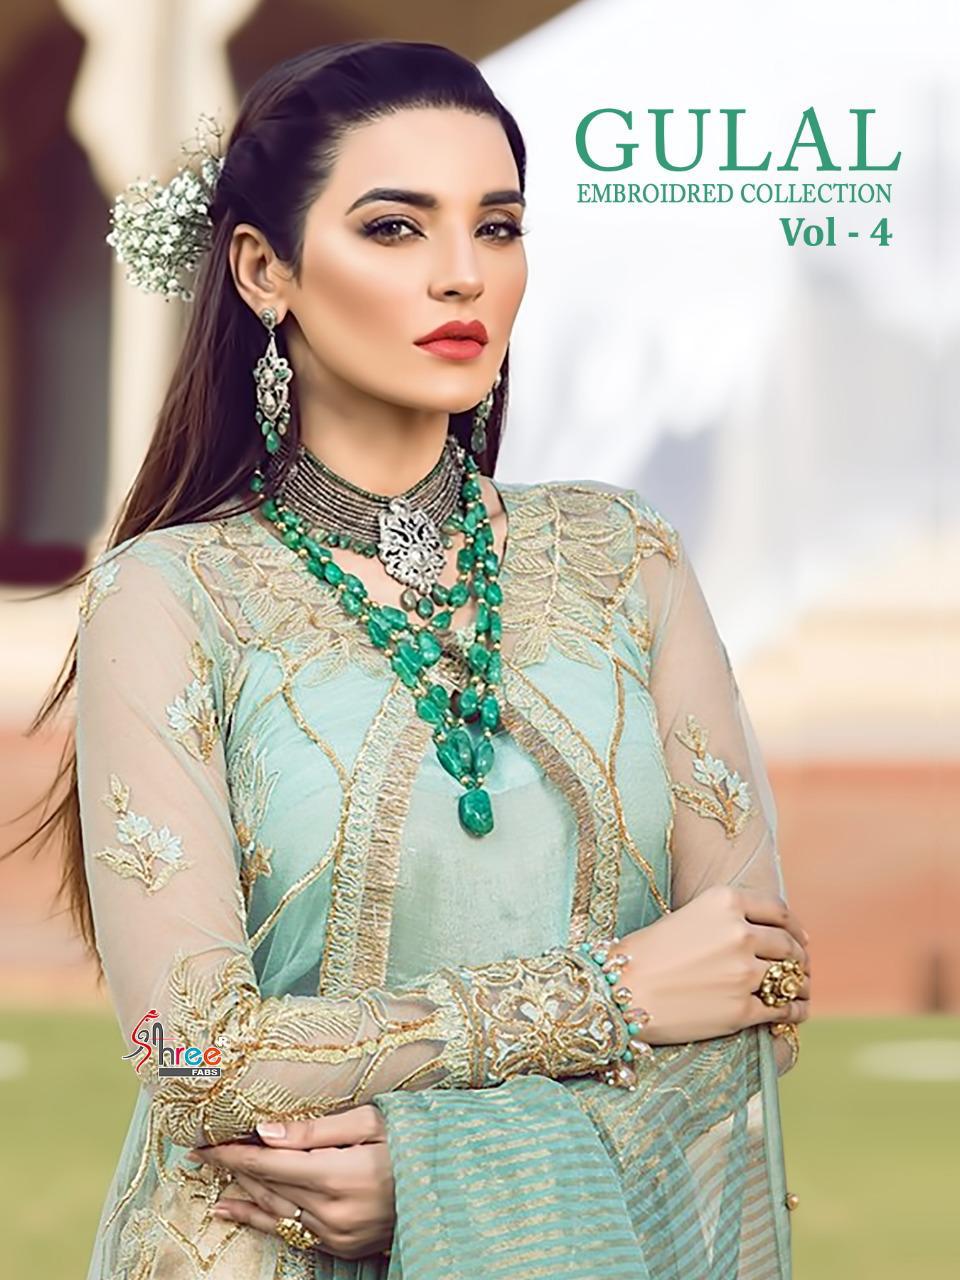 Shree Fabs Gulal Embroidered Collection Vol 4 Designer Pakistani Dress Catalog Dealer